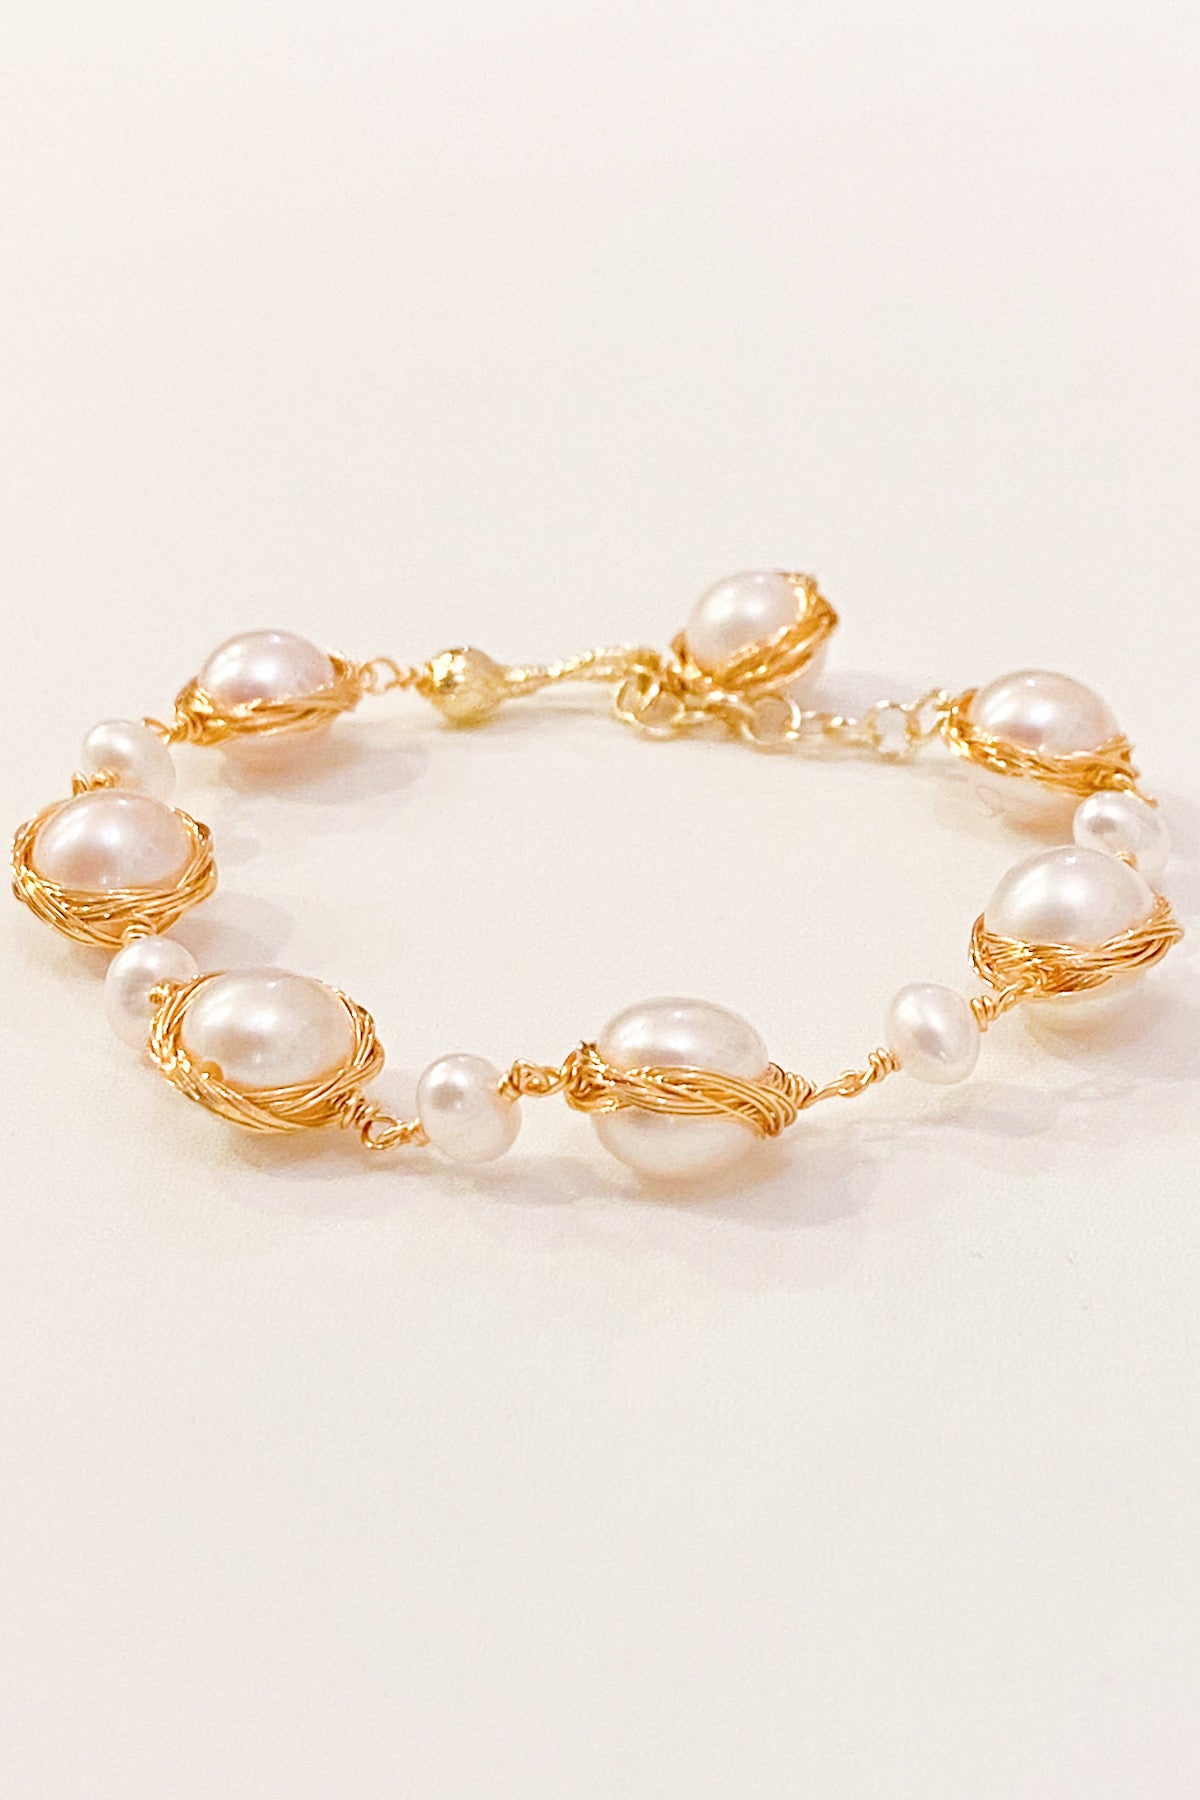 Rose Gold Pearl bracelet - Jewelry Designs By Leslie